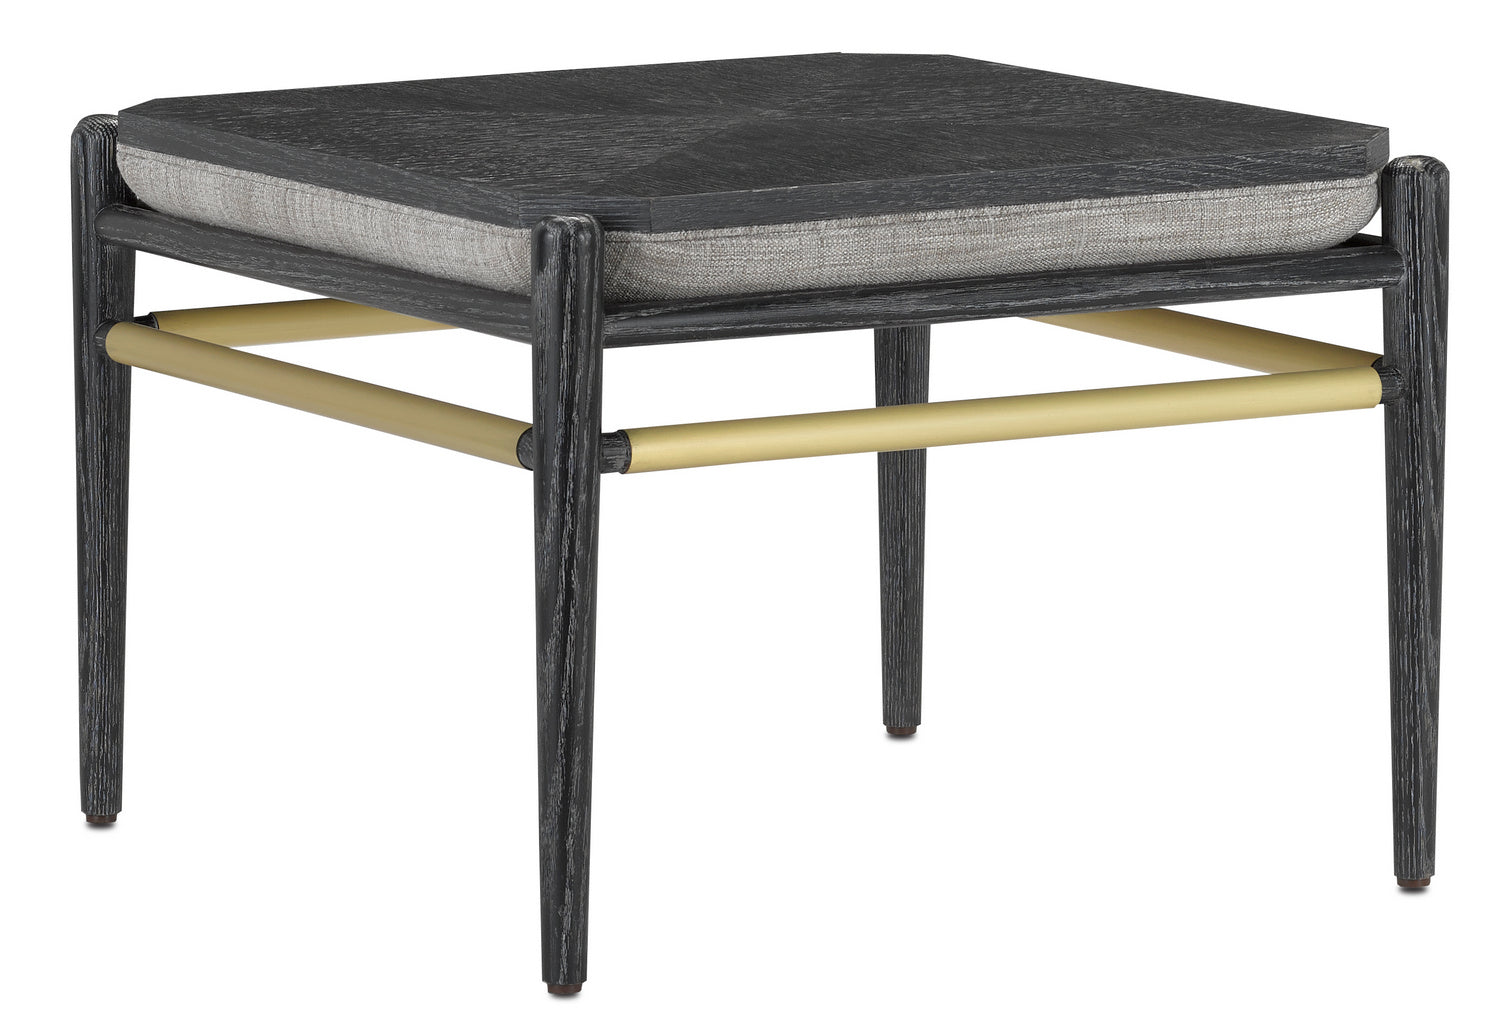 Ottoman from the Visby collection in Cerused Black/Brushed Brass finish